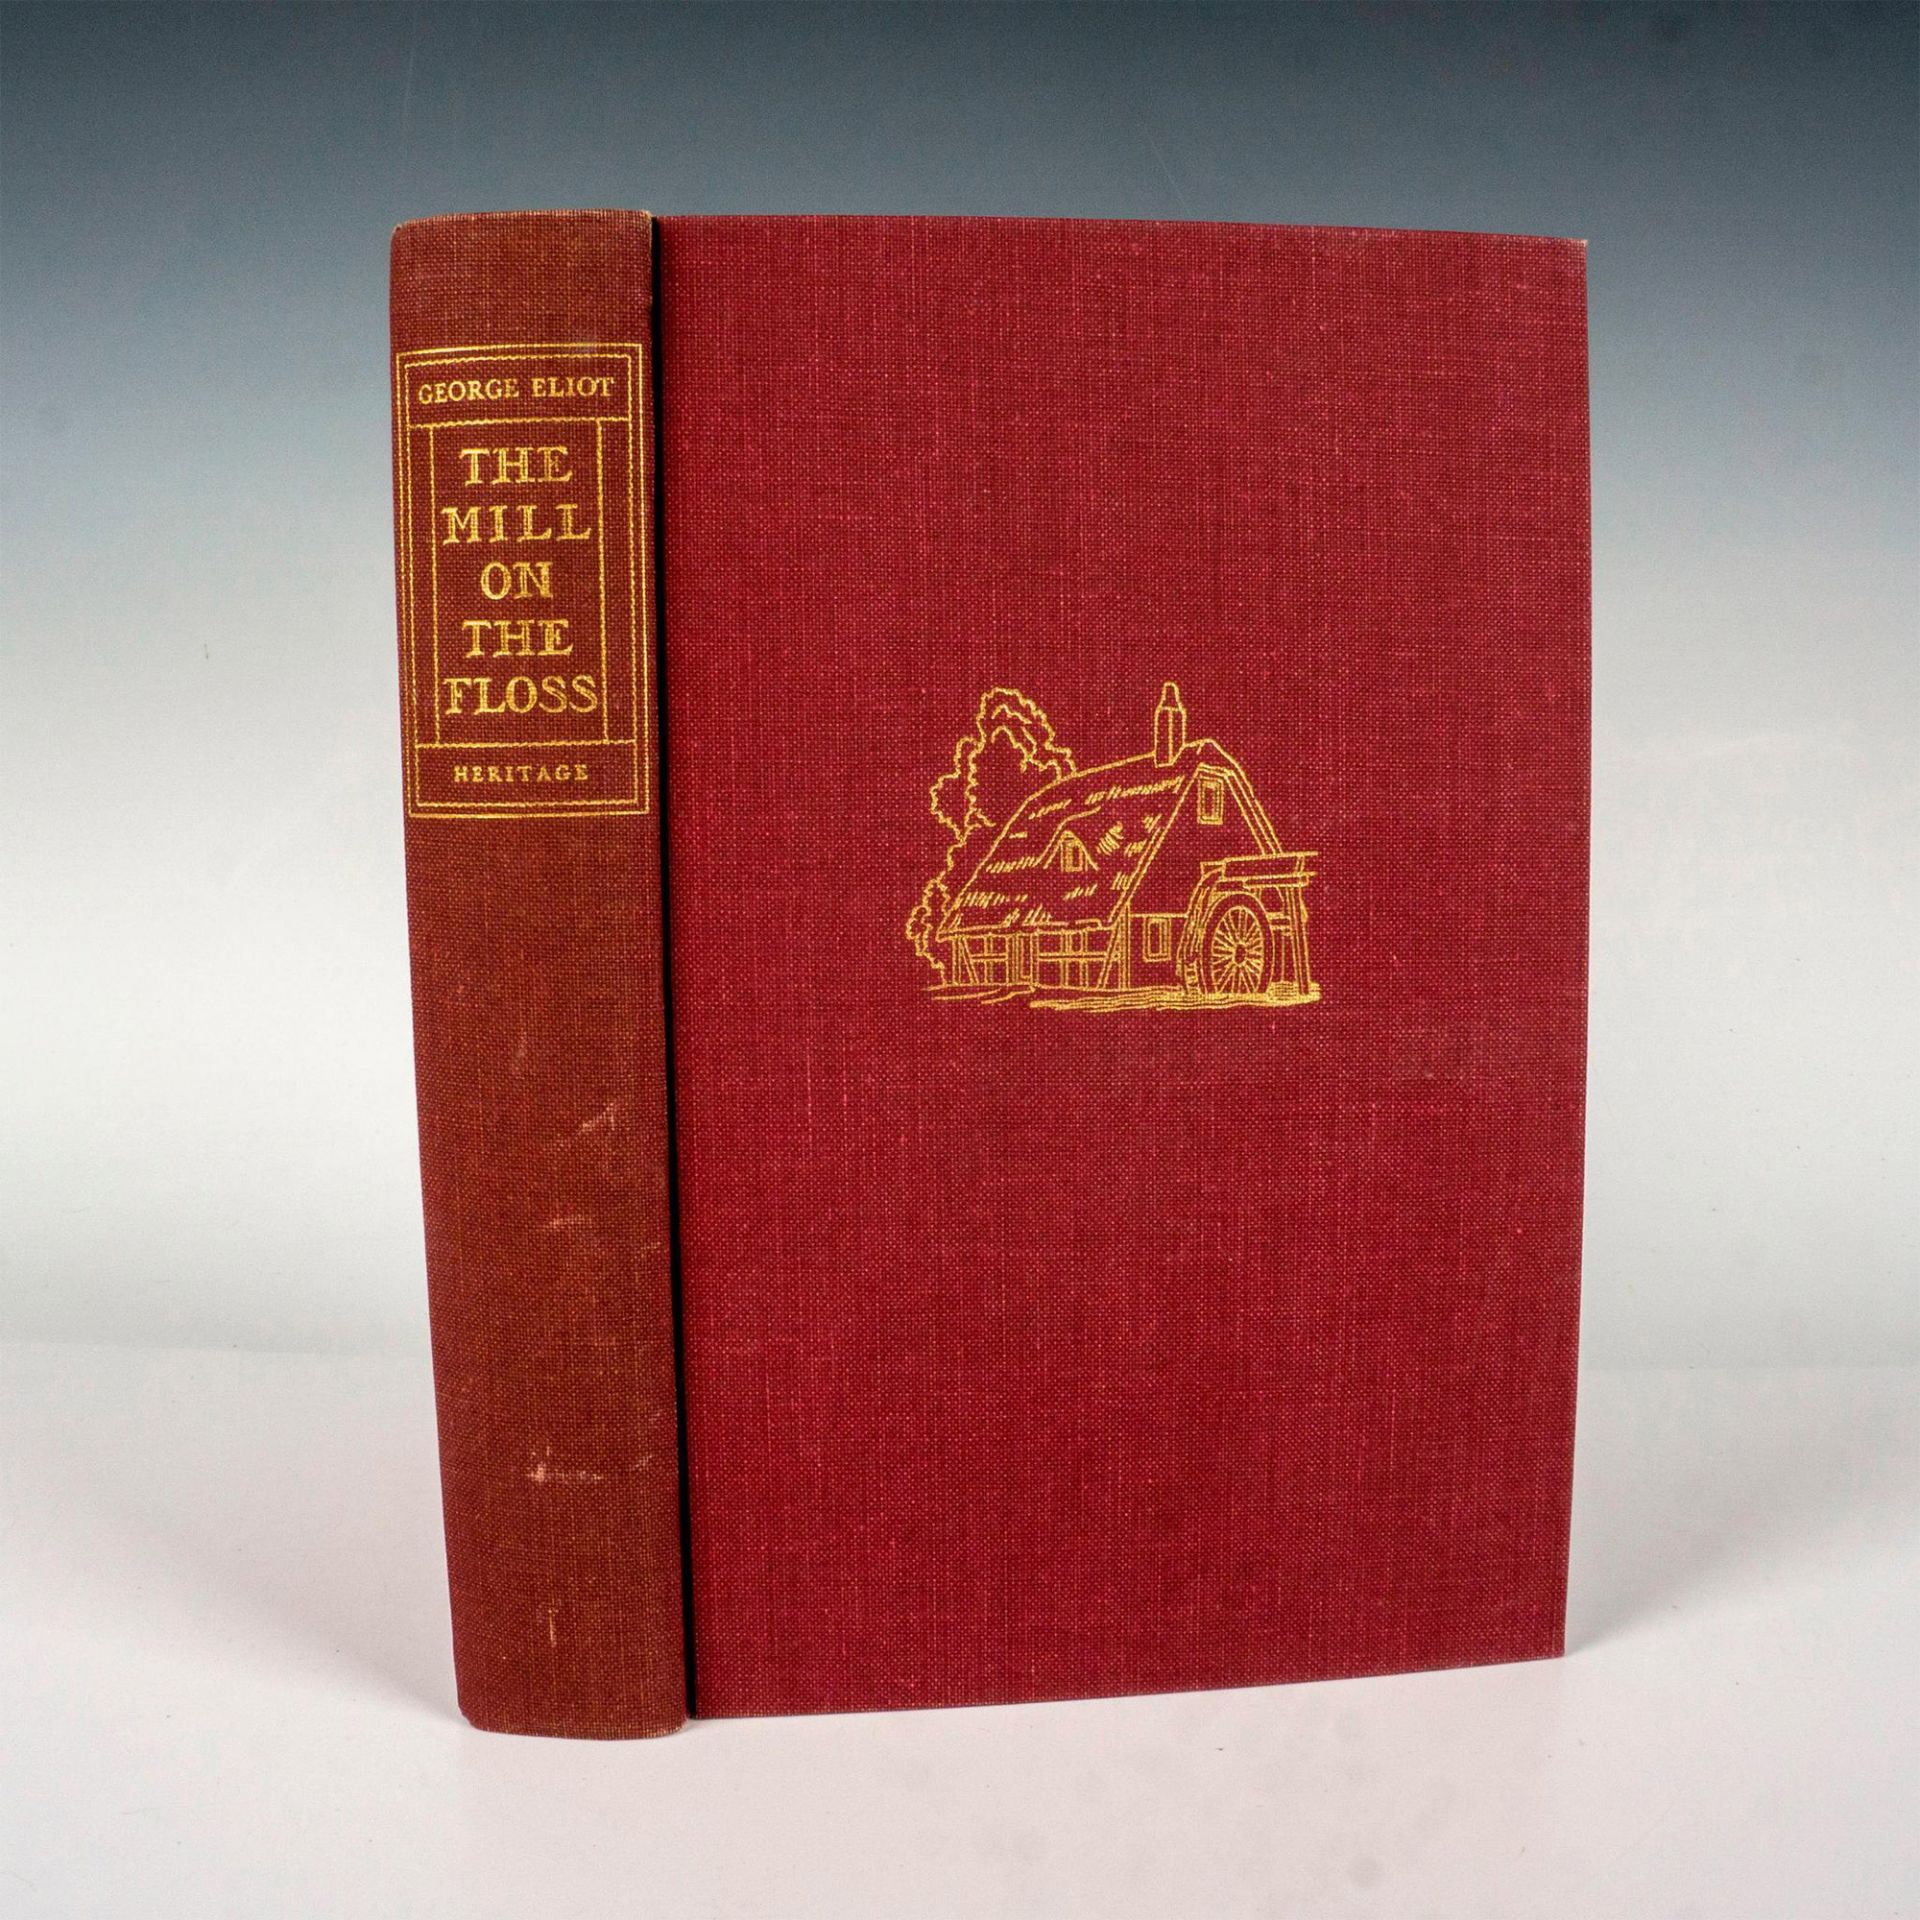 First Edition The Mill on the Floss, Book by George Eliot - Image 2 of 4